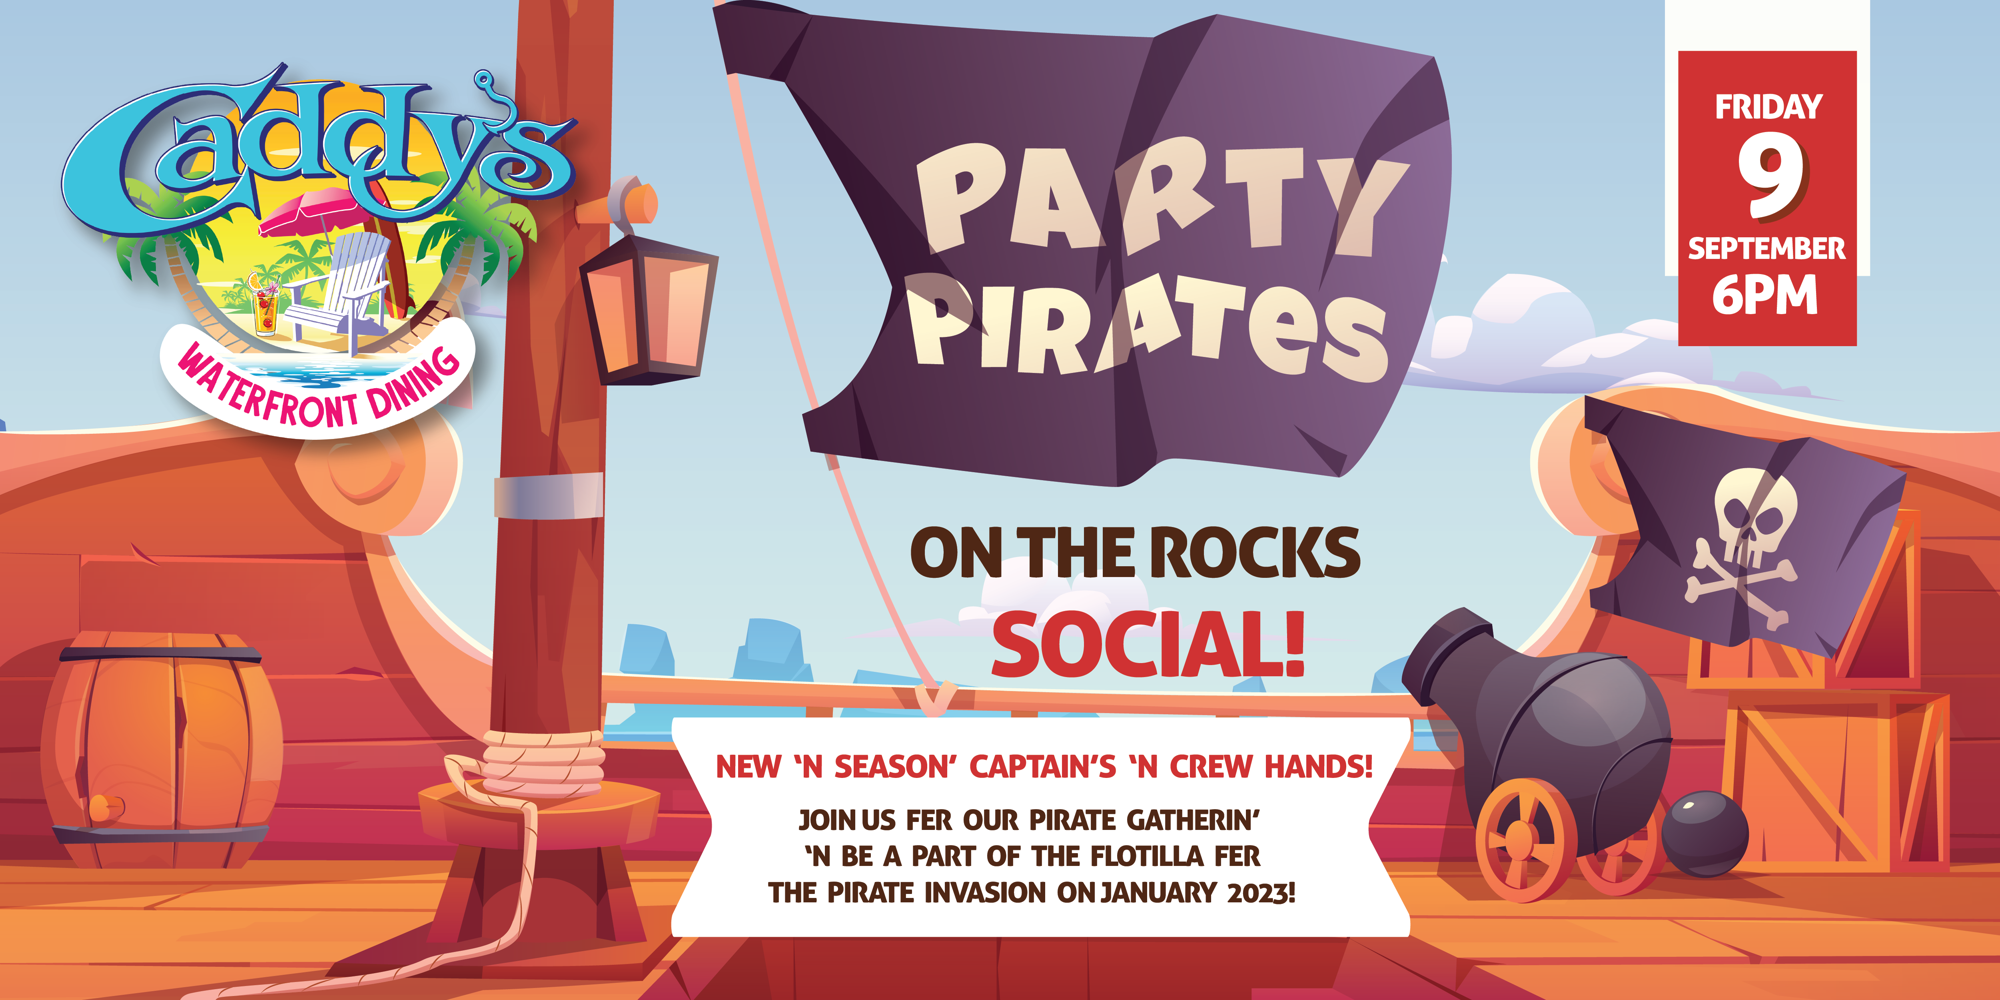 Party Pirates on the Rocks Social! promotional image